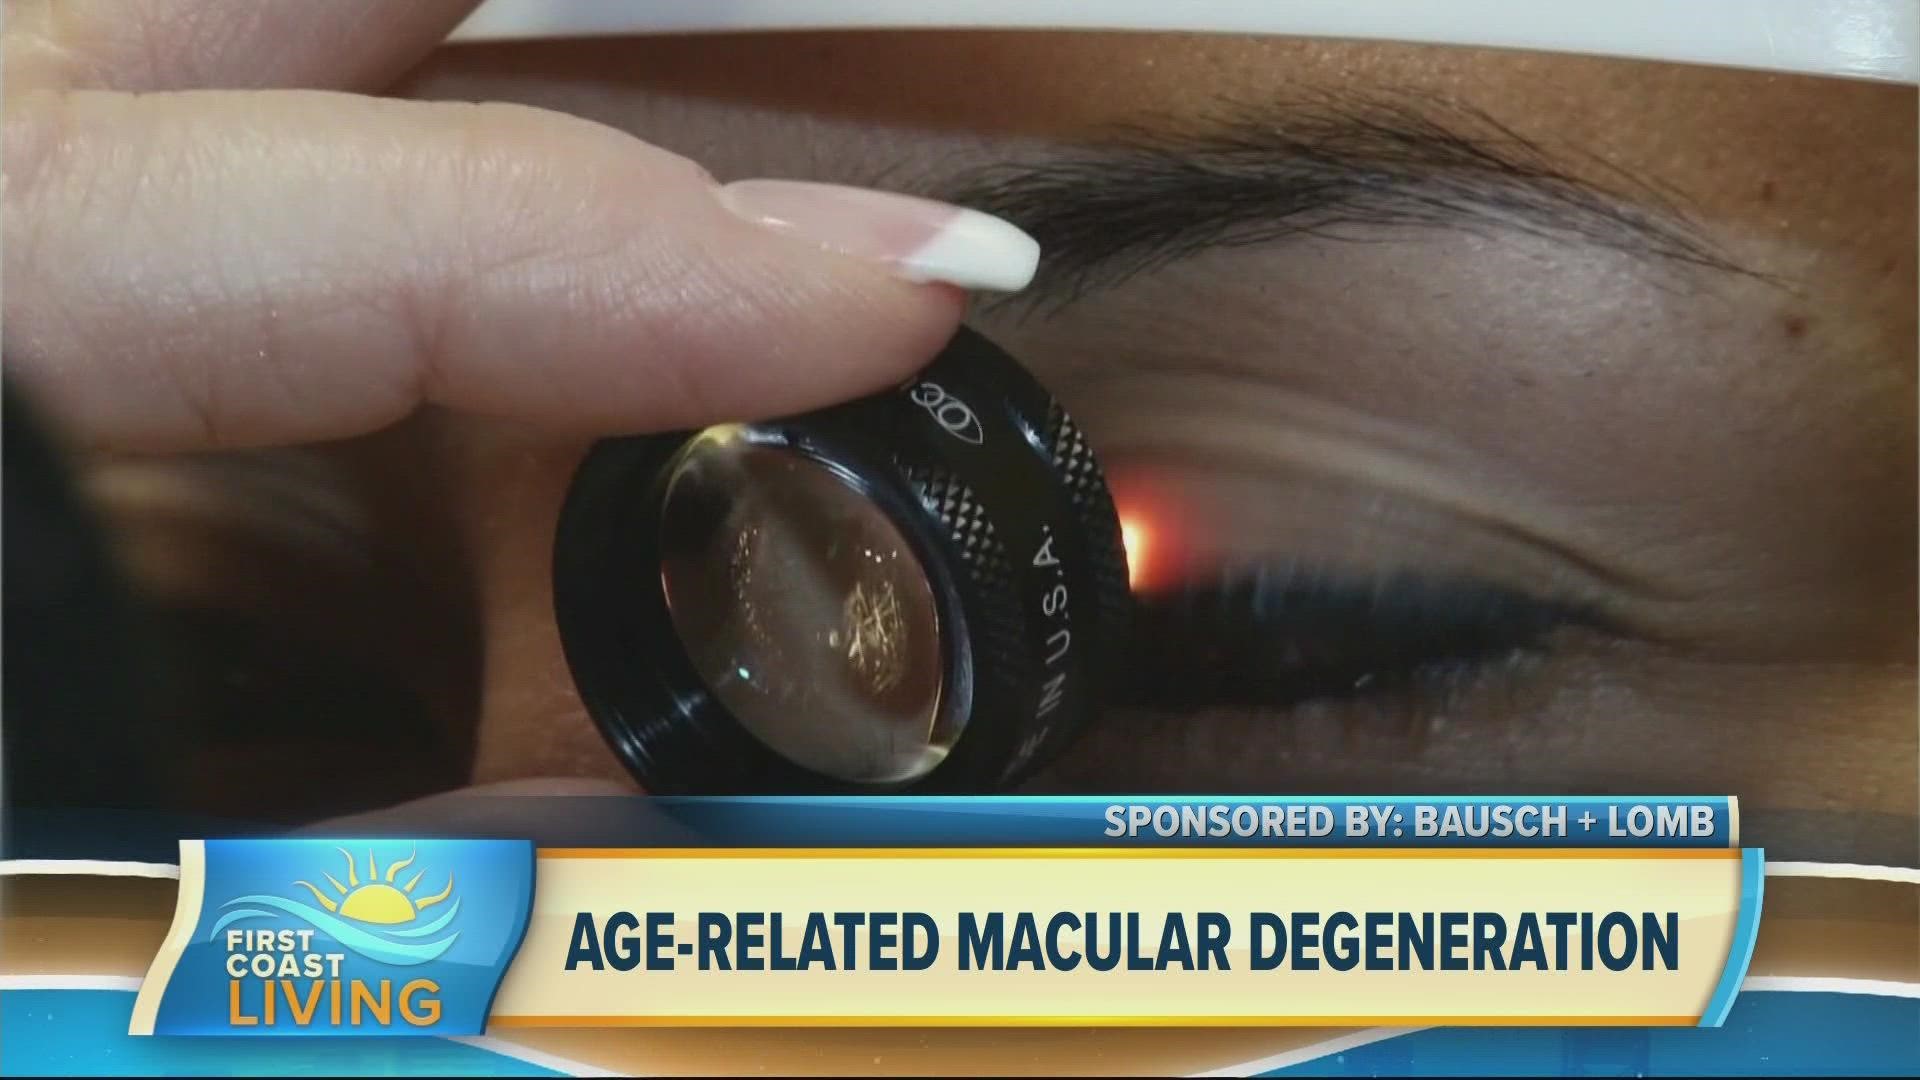 Age-related macular degeneration is an eye condition that can lead to you becoming blind especially if you are older than 50.